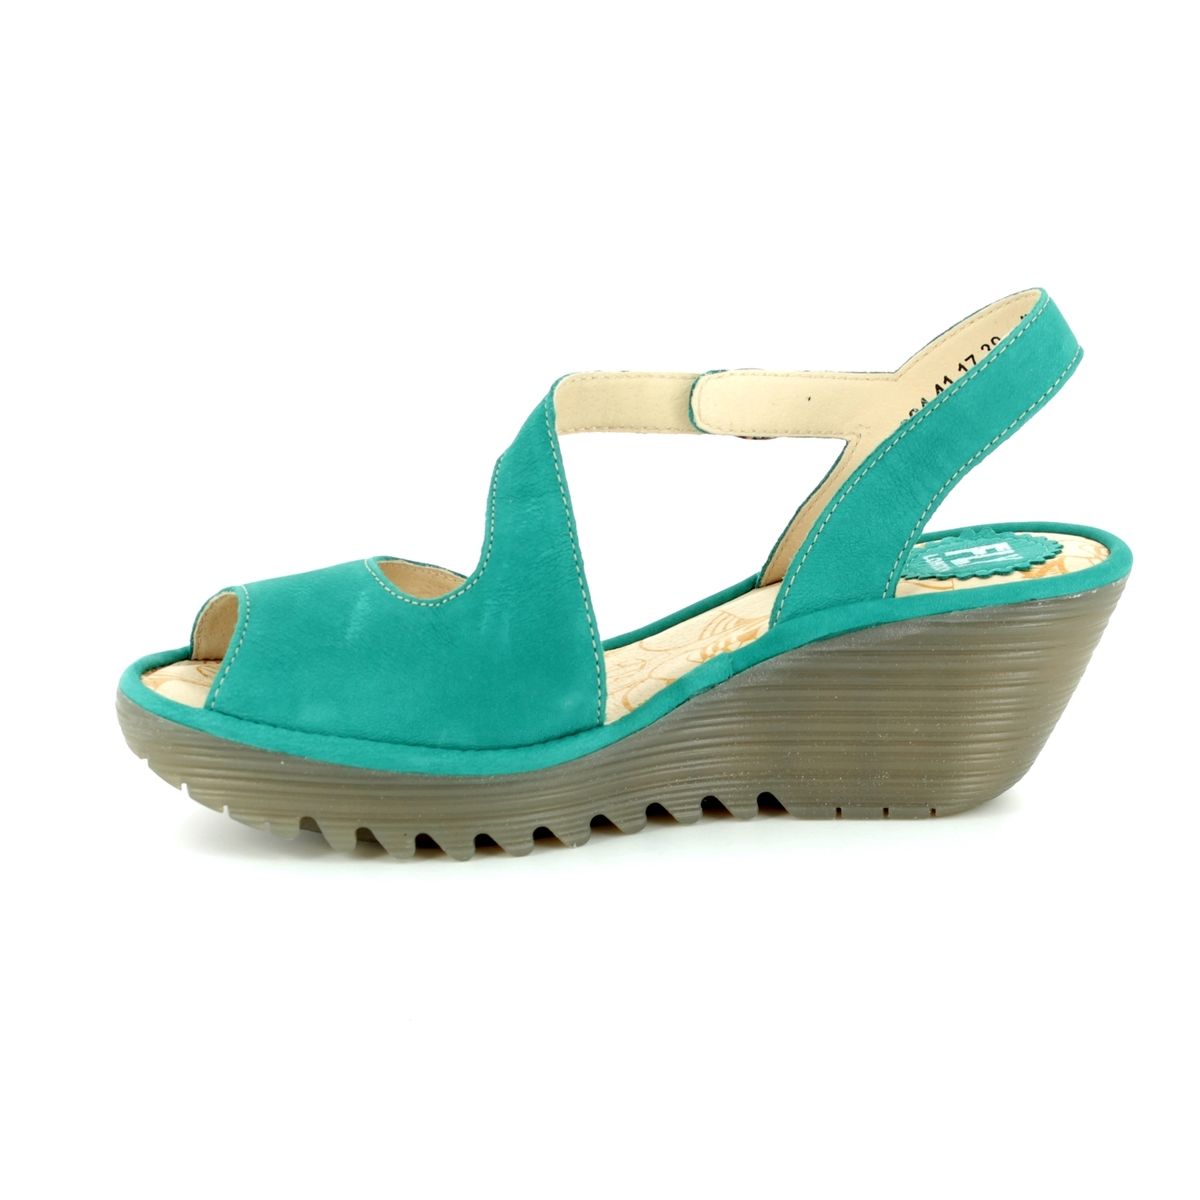 Fly London Yamp 836 P500836-004 Turquoise Wedge Sandals